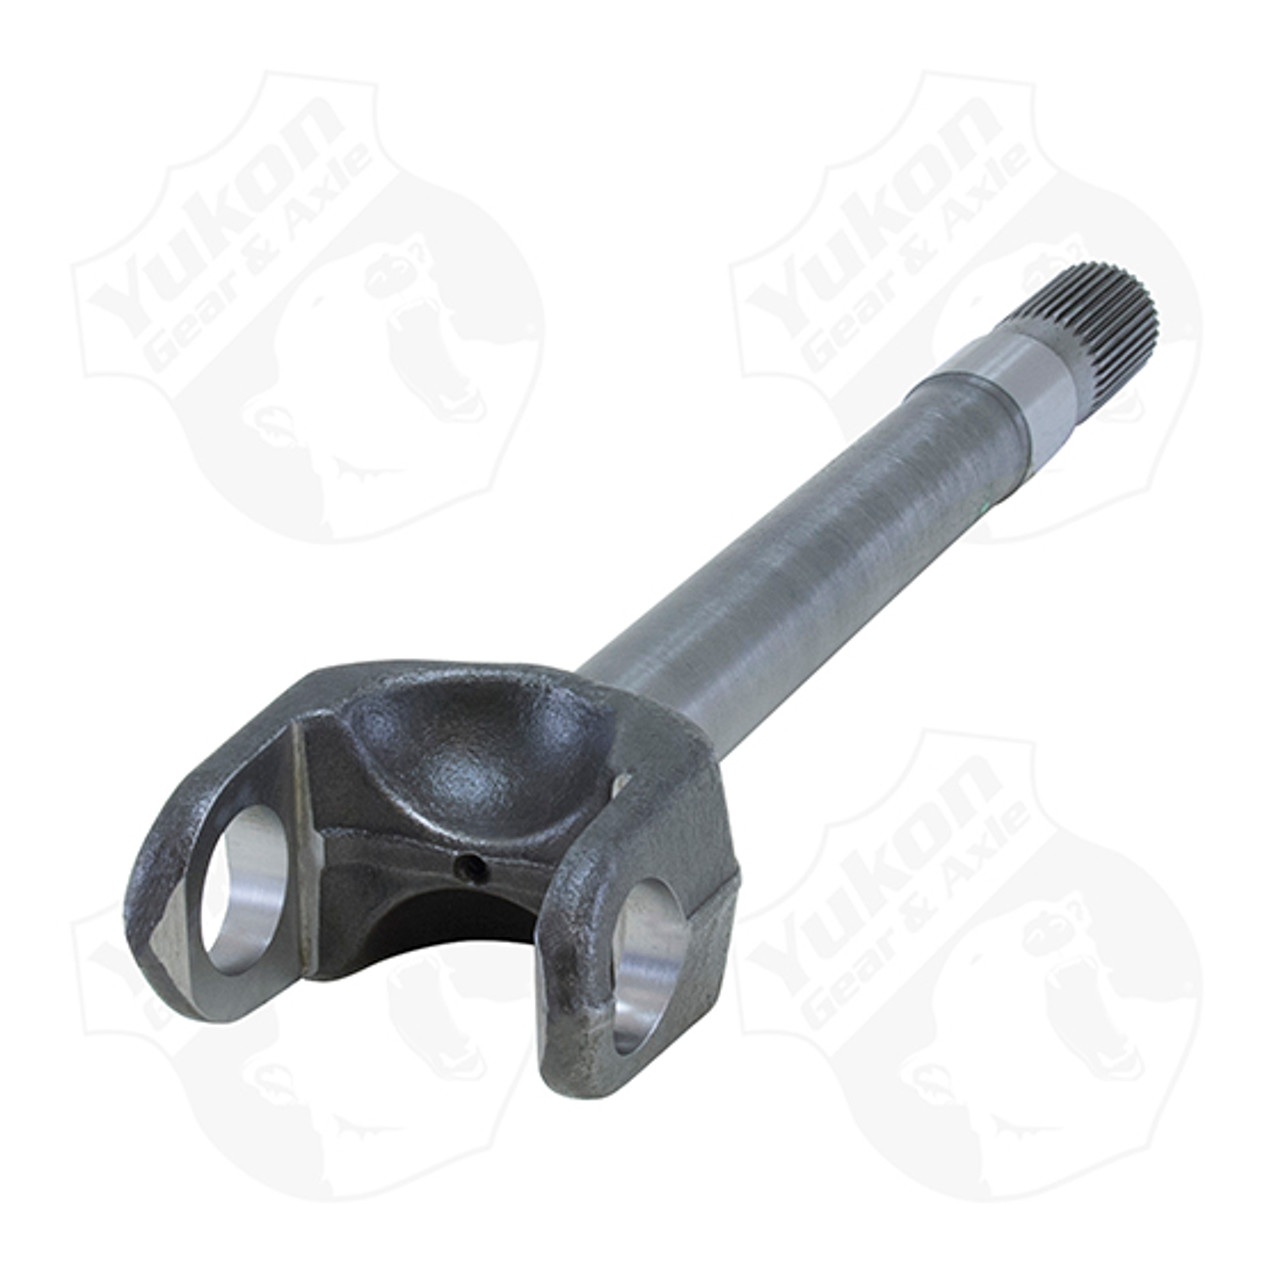 Yukon 4340 Chrome-Moly right hand replacement inner axle for Dana 44, Dodge front.